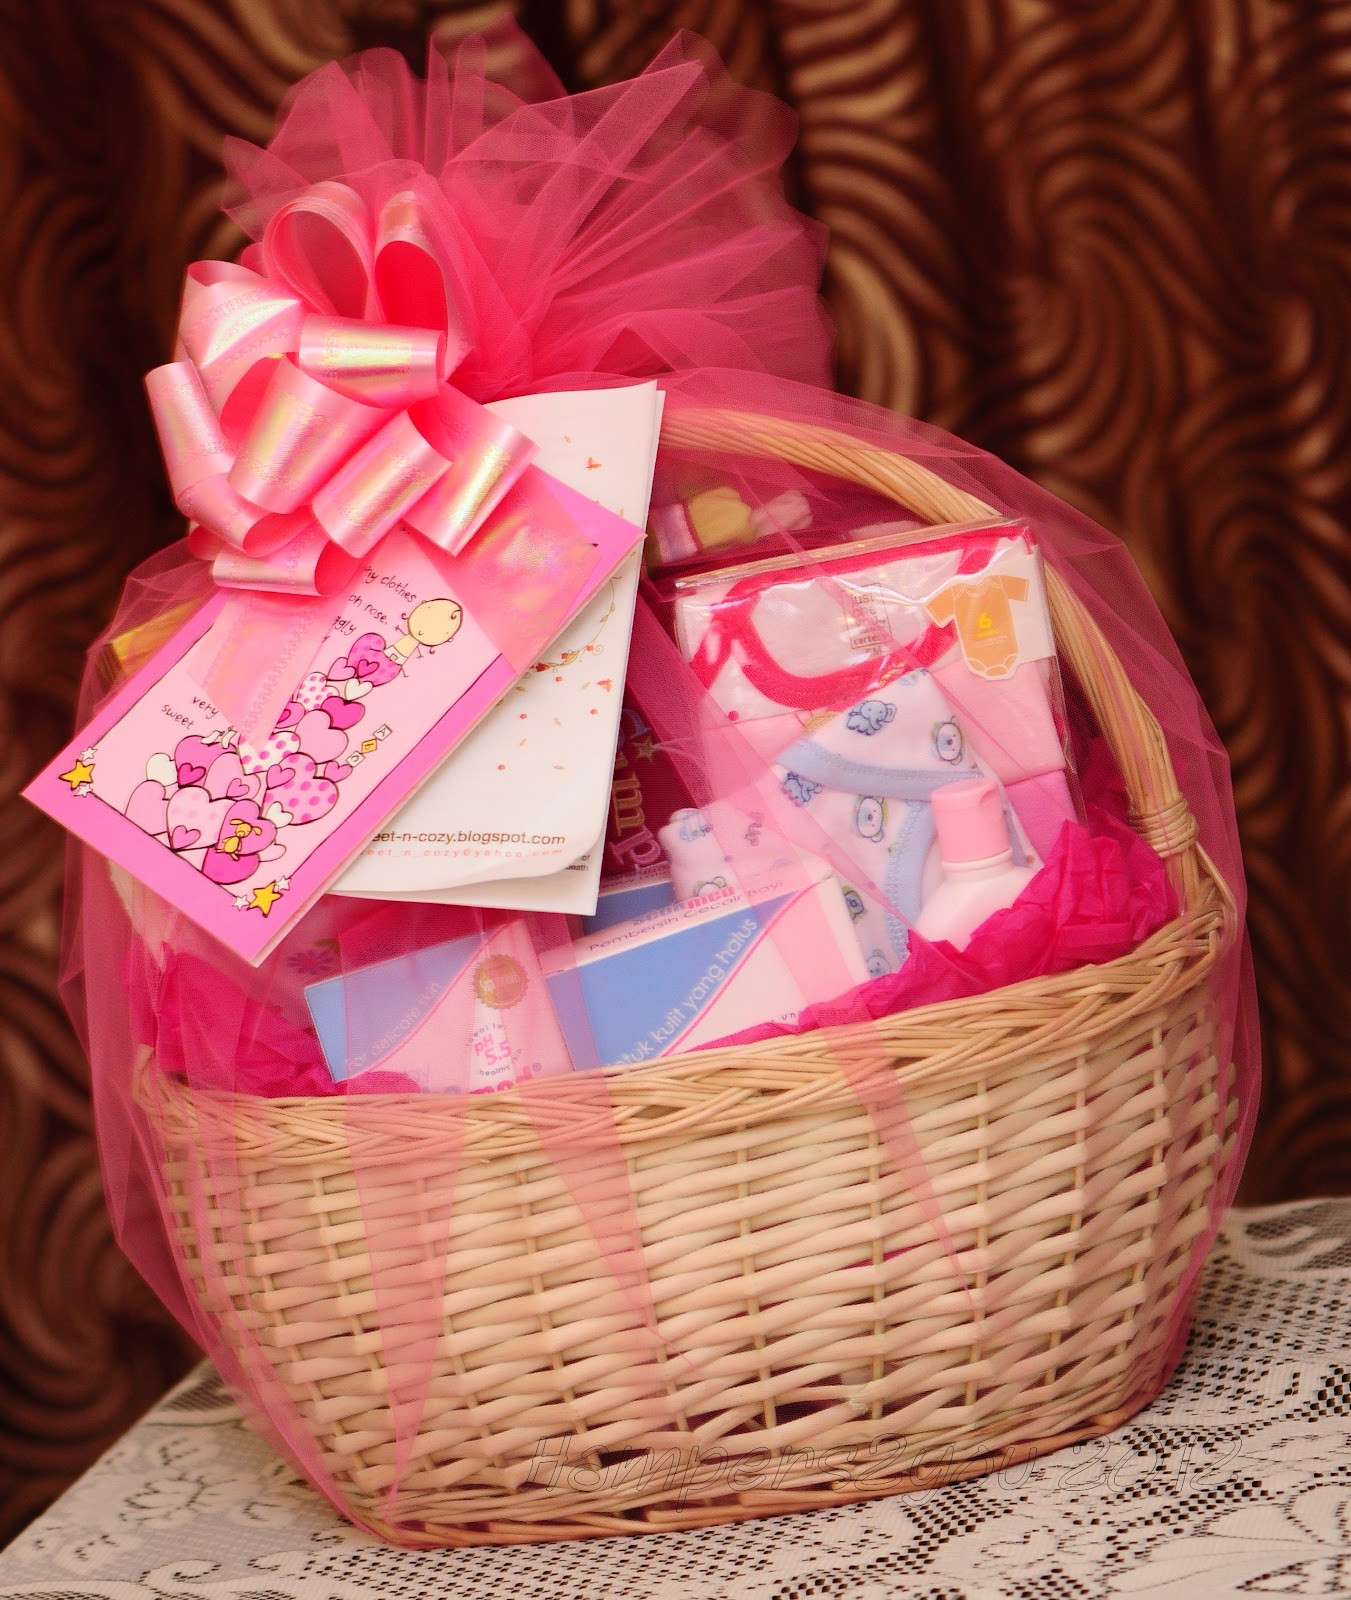 New Born Baby Gift Basket
 Hampers2you Baby Gift Baskets for Newborn Girl